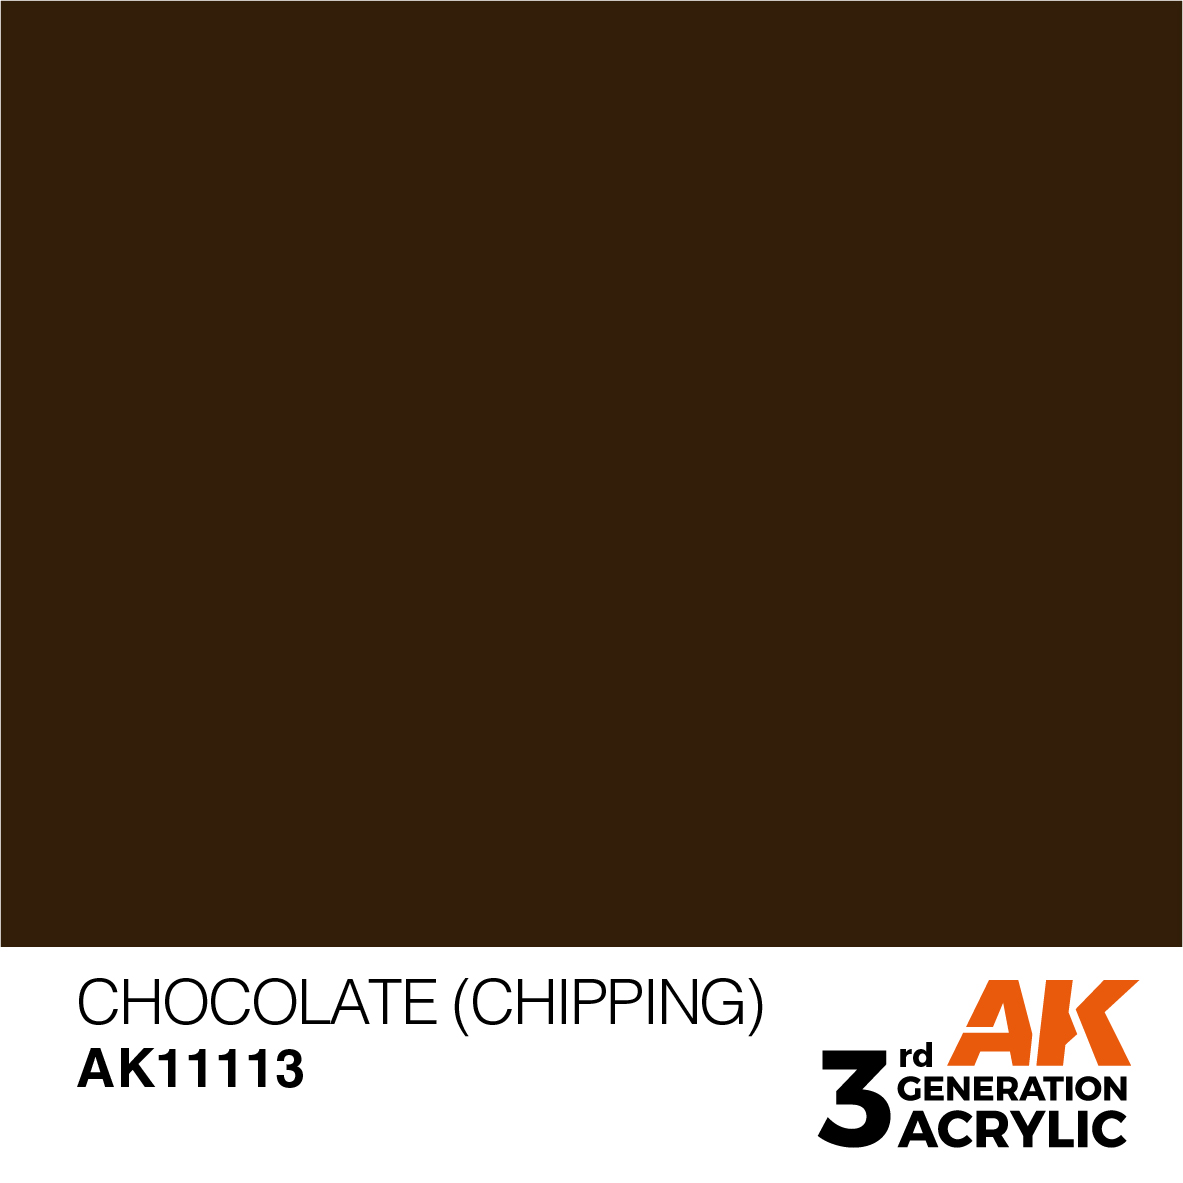 CHOCOLATE (CHIPPING) – STANDARD